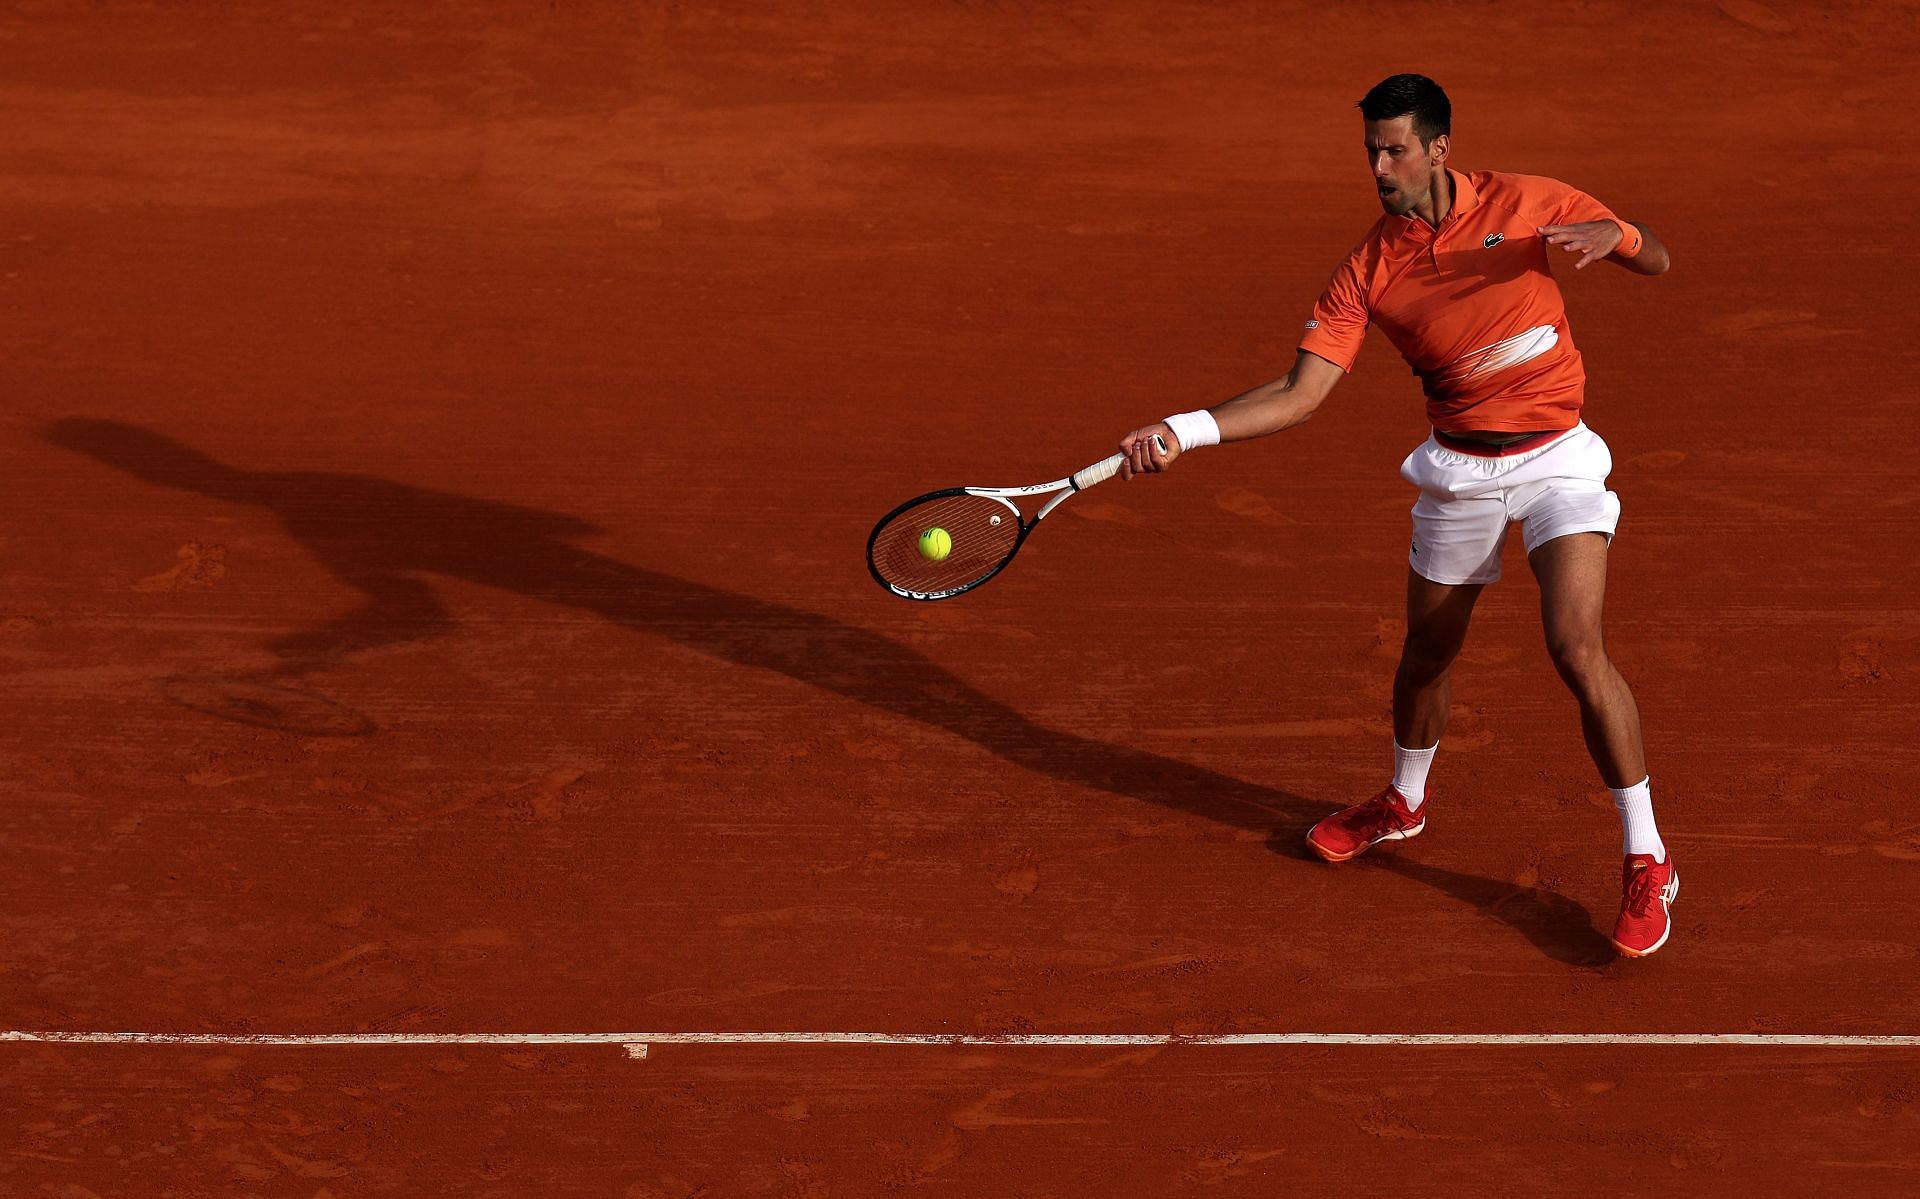 Novak Djokovic fashioned out thrilling comeback wins against compatriots Djere and Kecmanovic at the Serbia Open